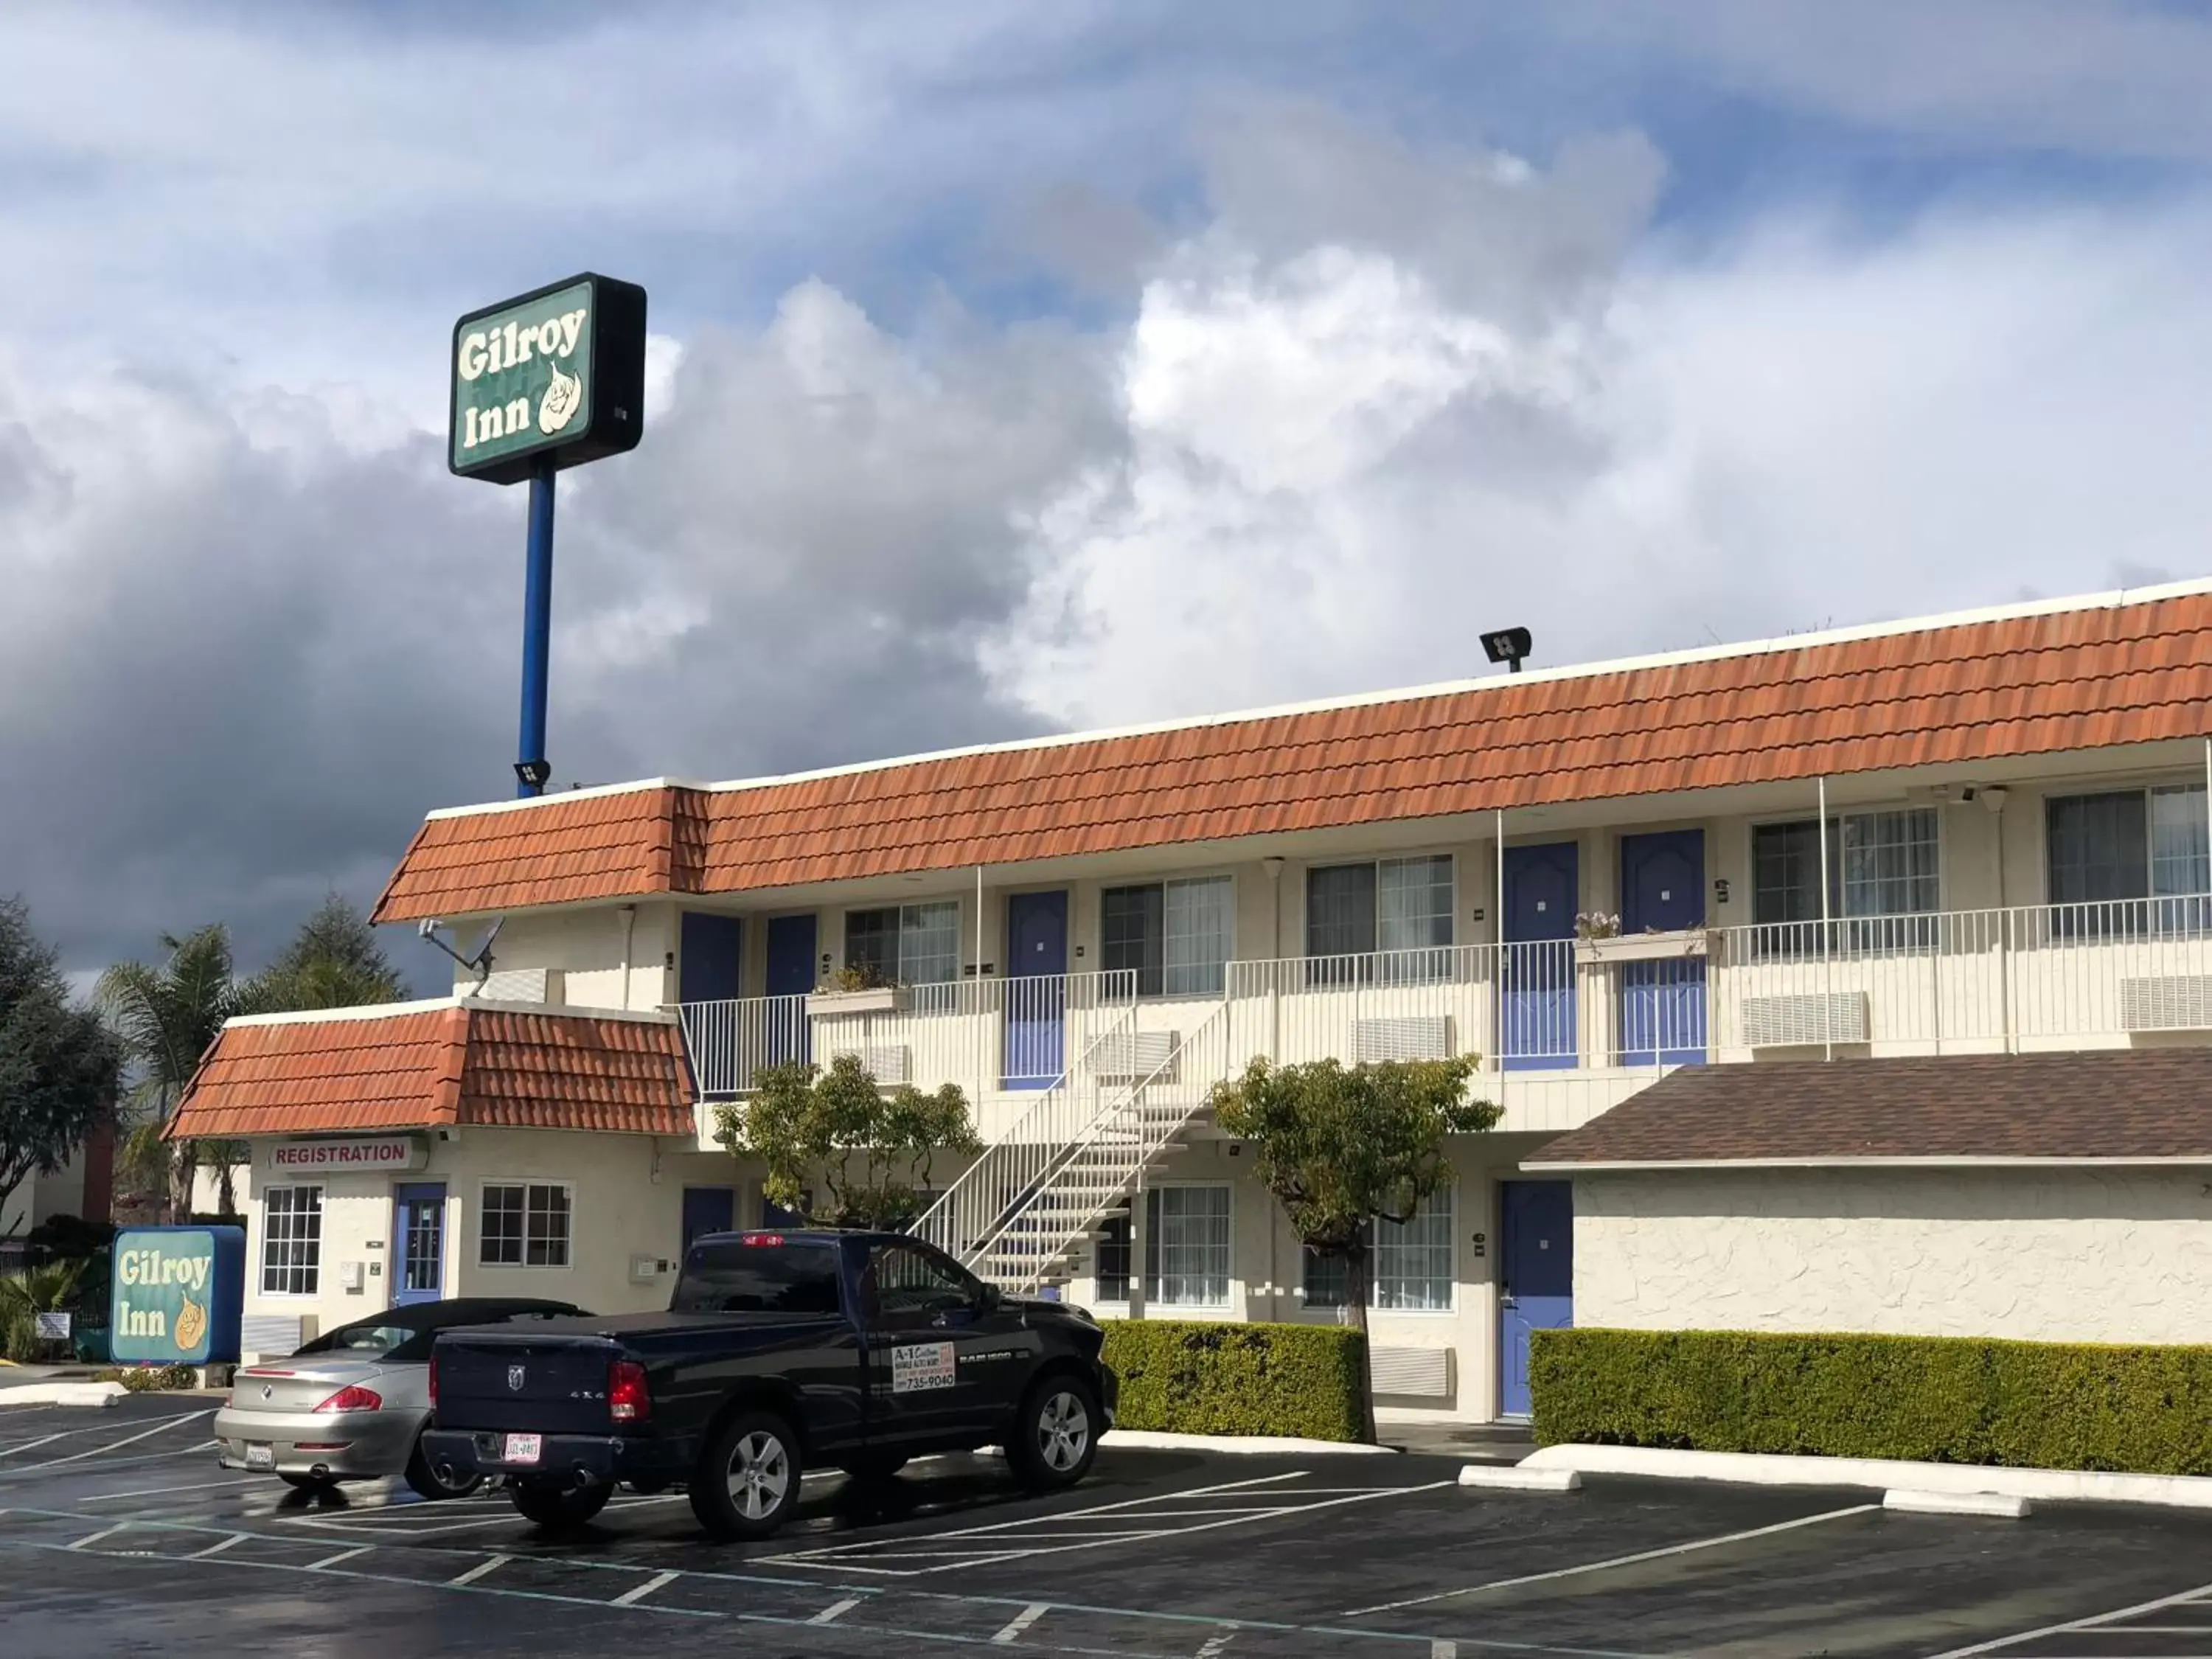 Property Building in Gilroy Inn